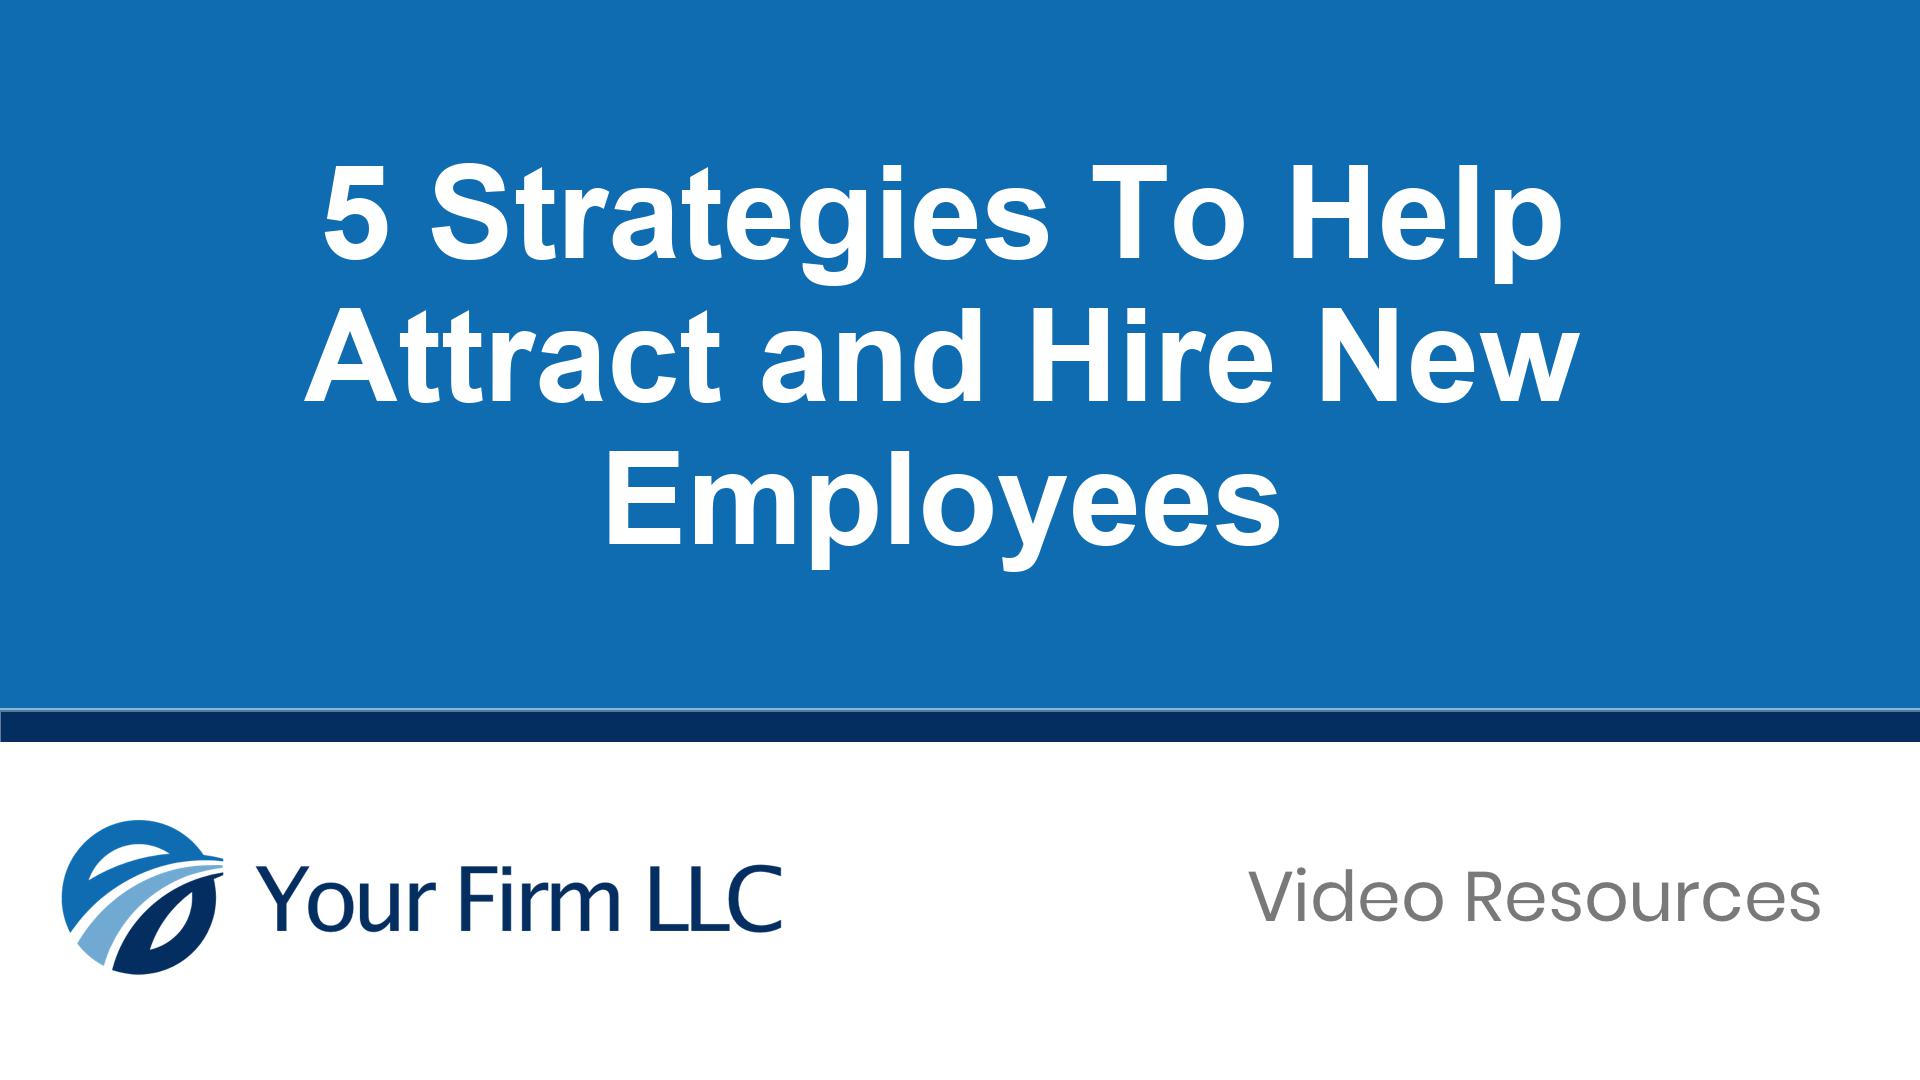 5 Strategies To Help Attract and Hire New Employees